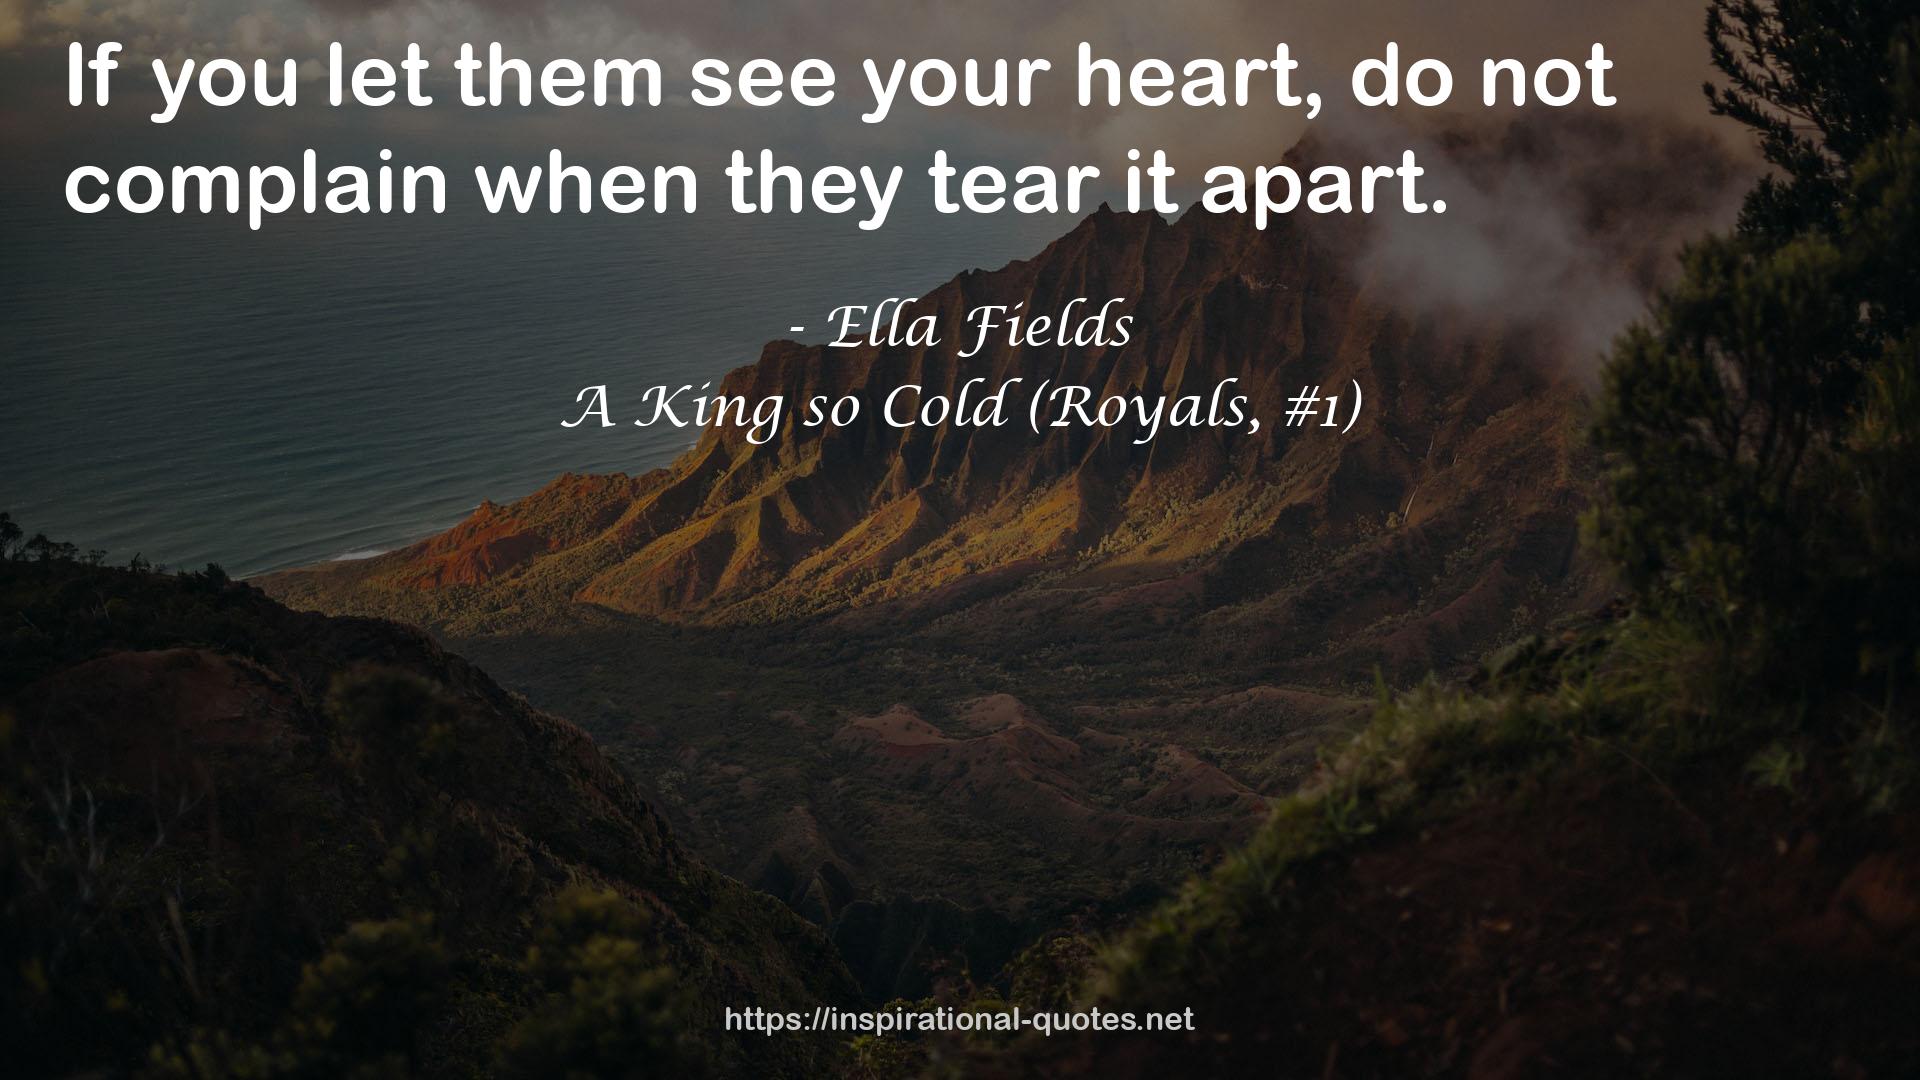 A King so Cold (Royals, #1) QUOTES